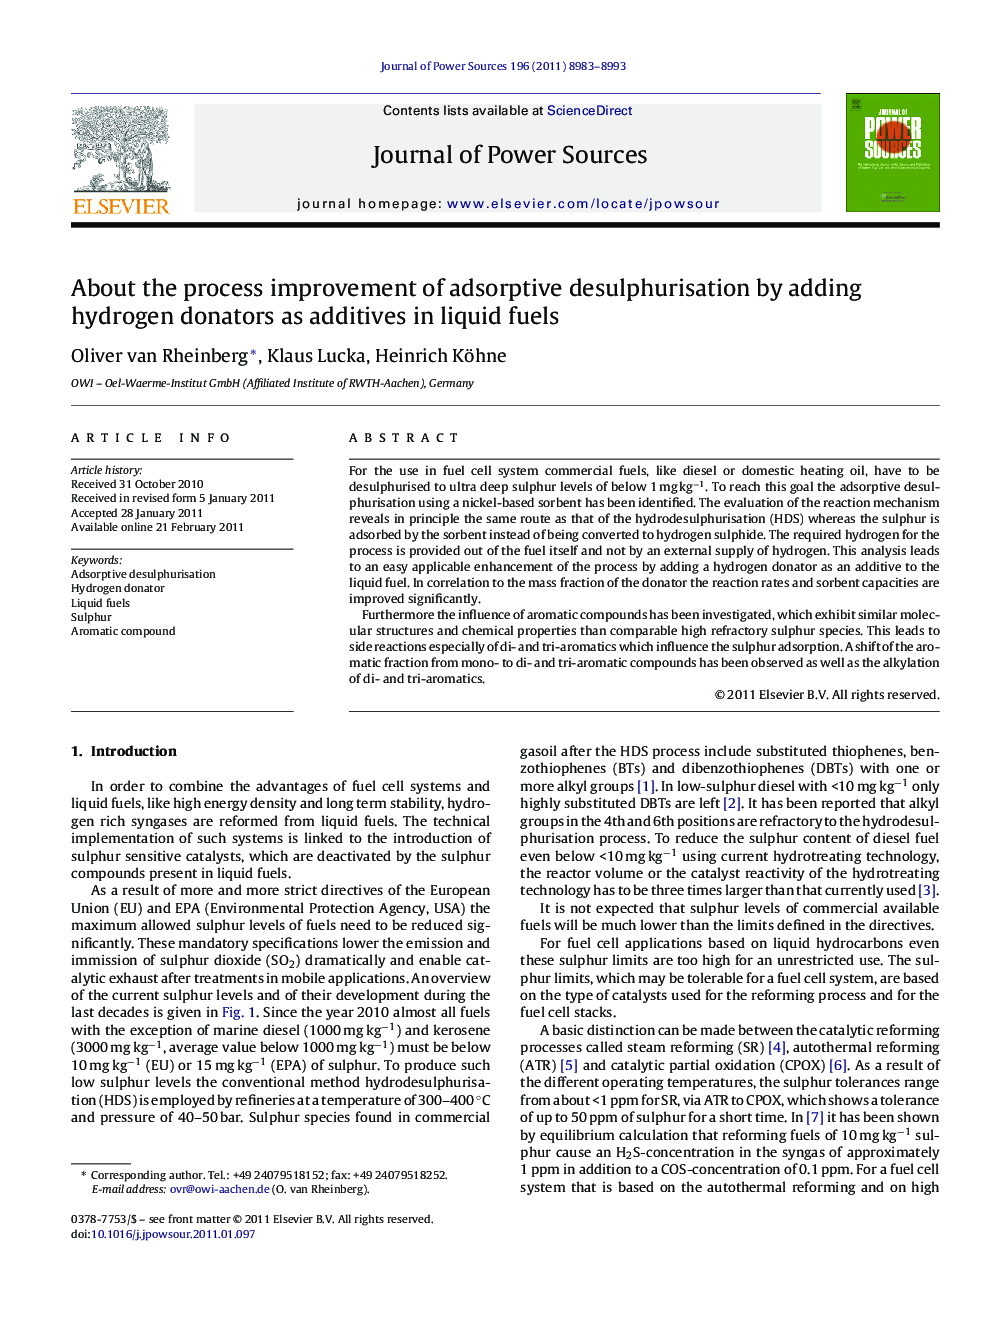 About the process improvement of adsorptive desulphurisation by adding hydrogen donators as additives in liquid fuels